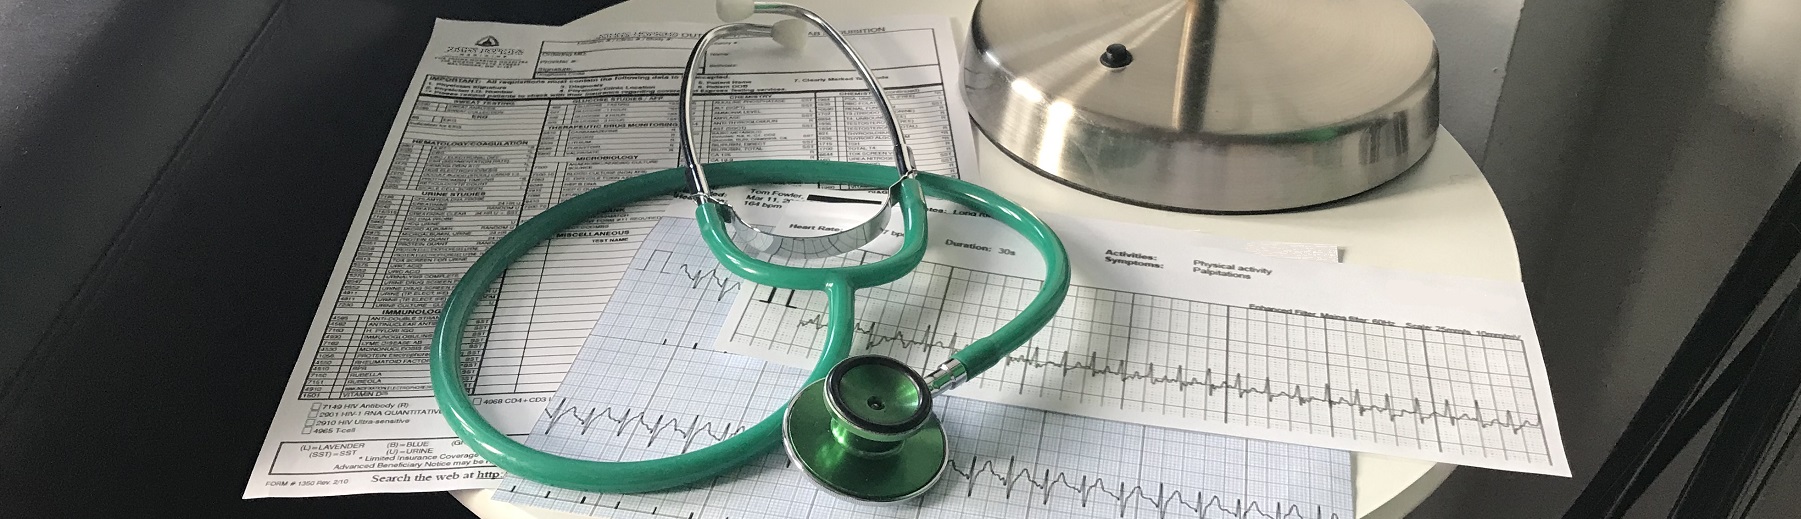 A stethoscope with some heart rate printouts